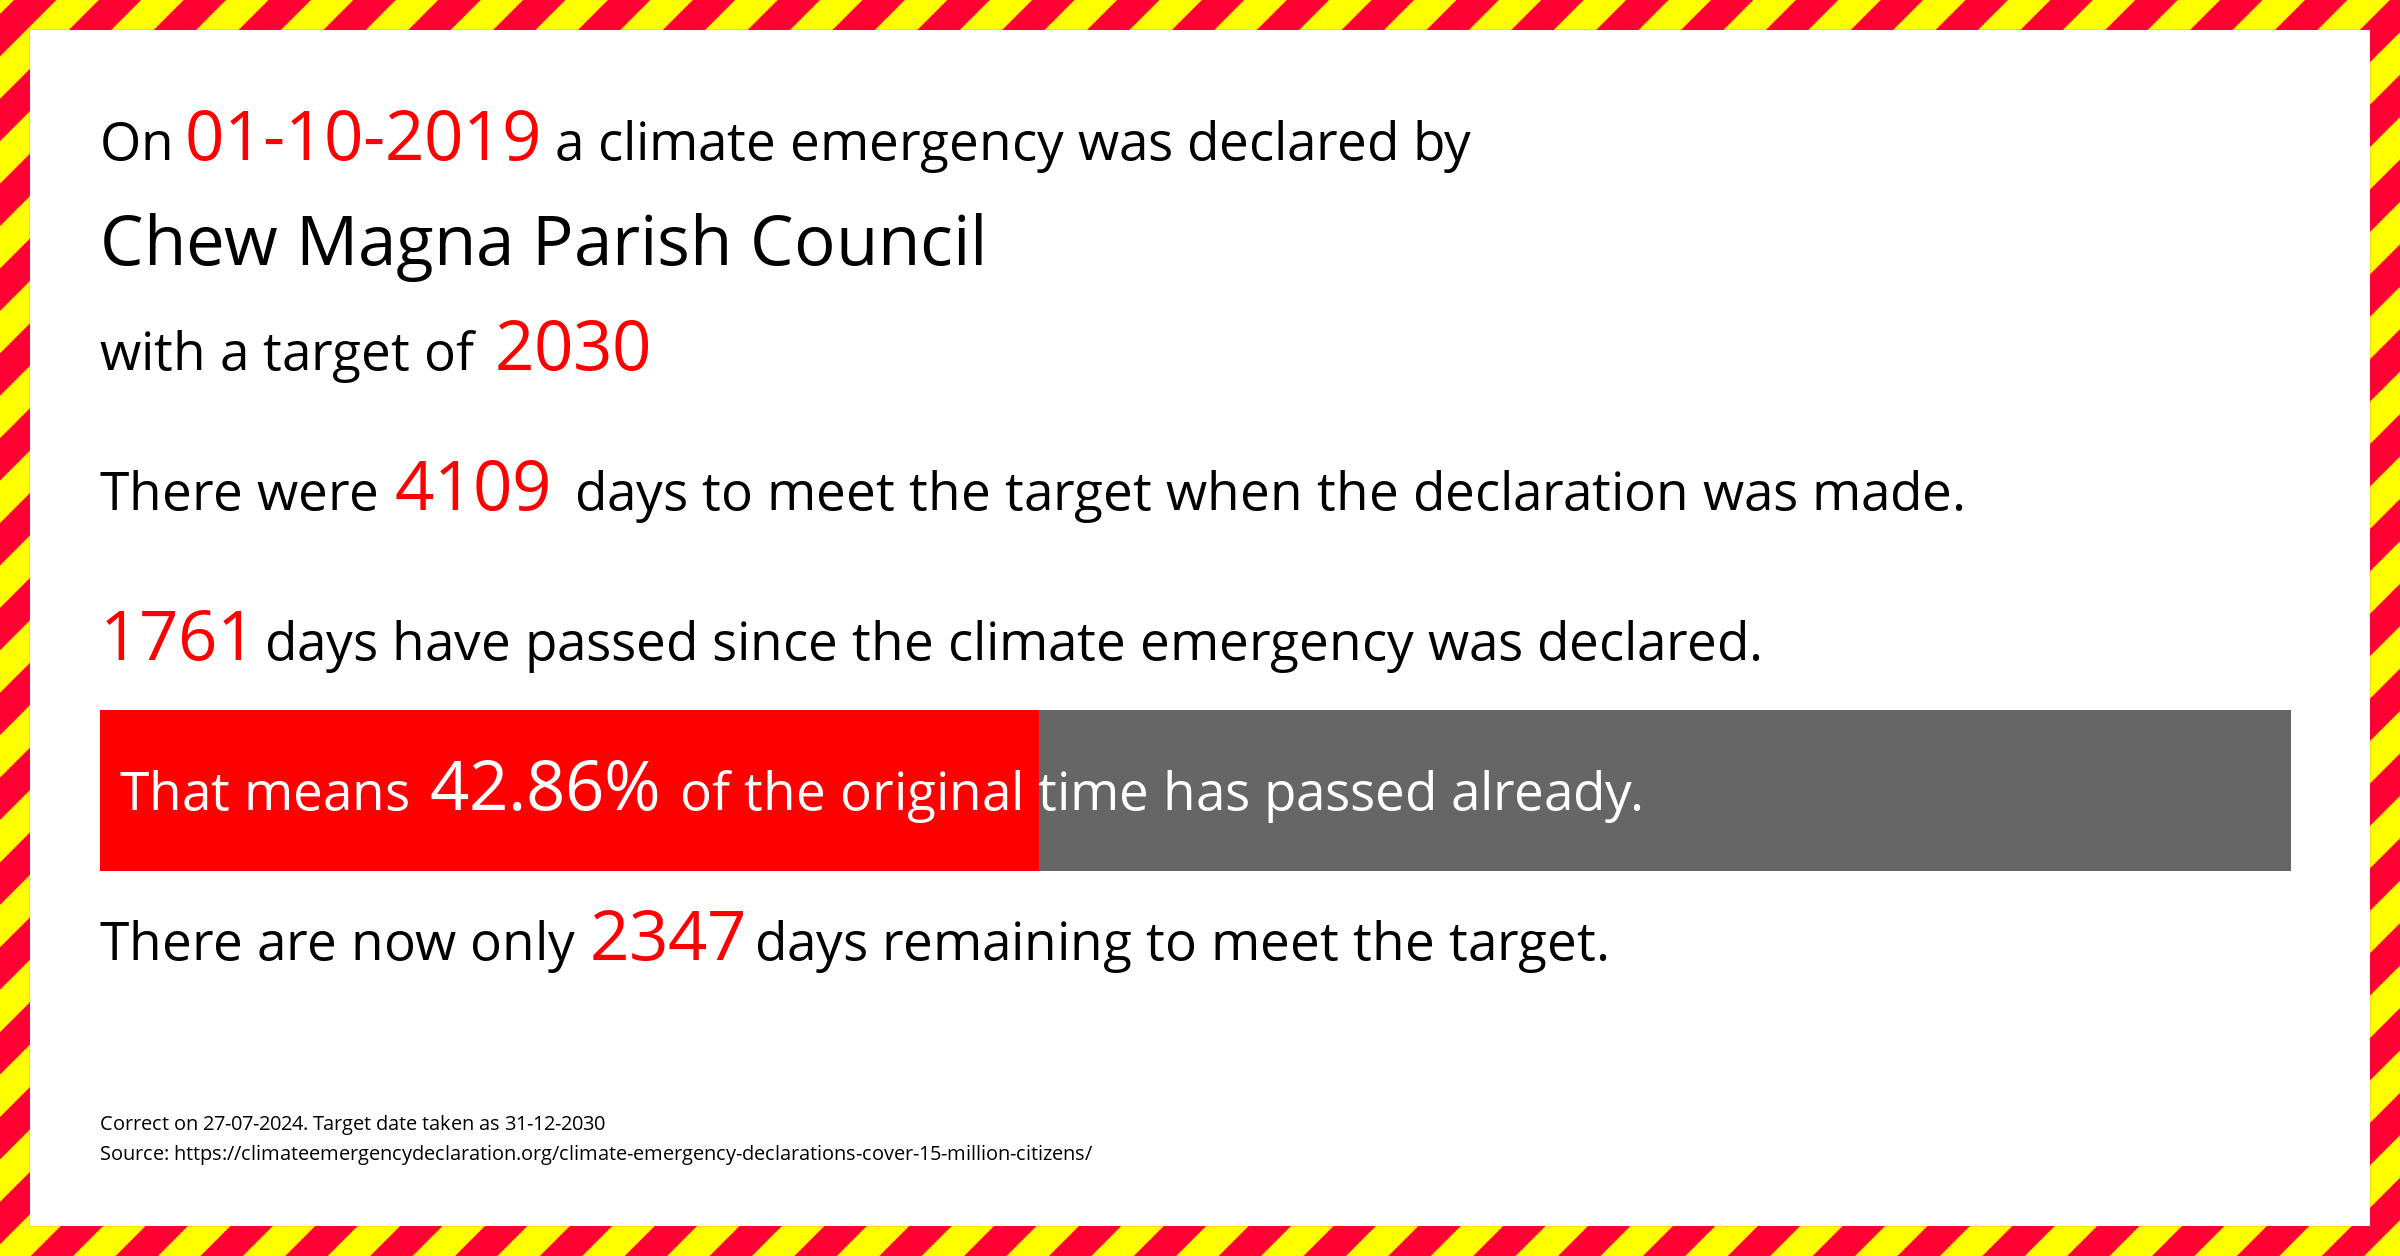 Chew Magna Parish Council  declared a Climate emergency on Tuesday 1st October 2019, with a target of 2030.